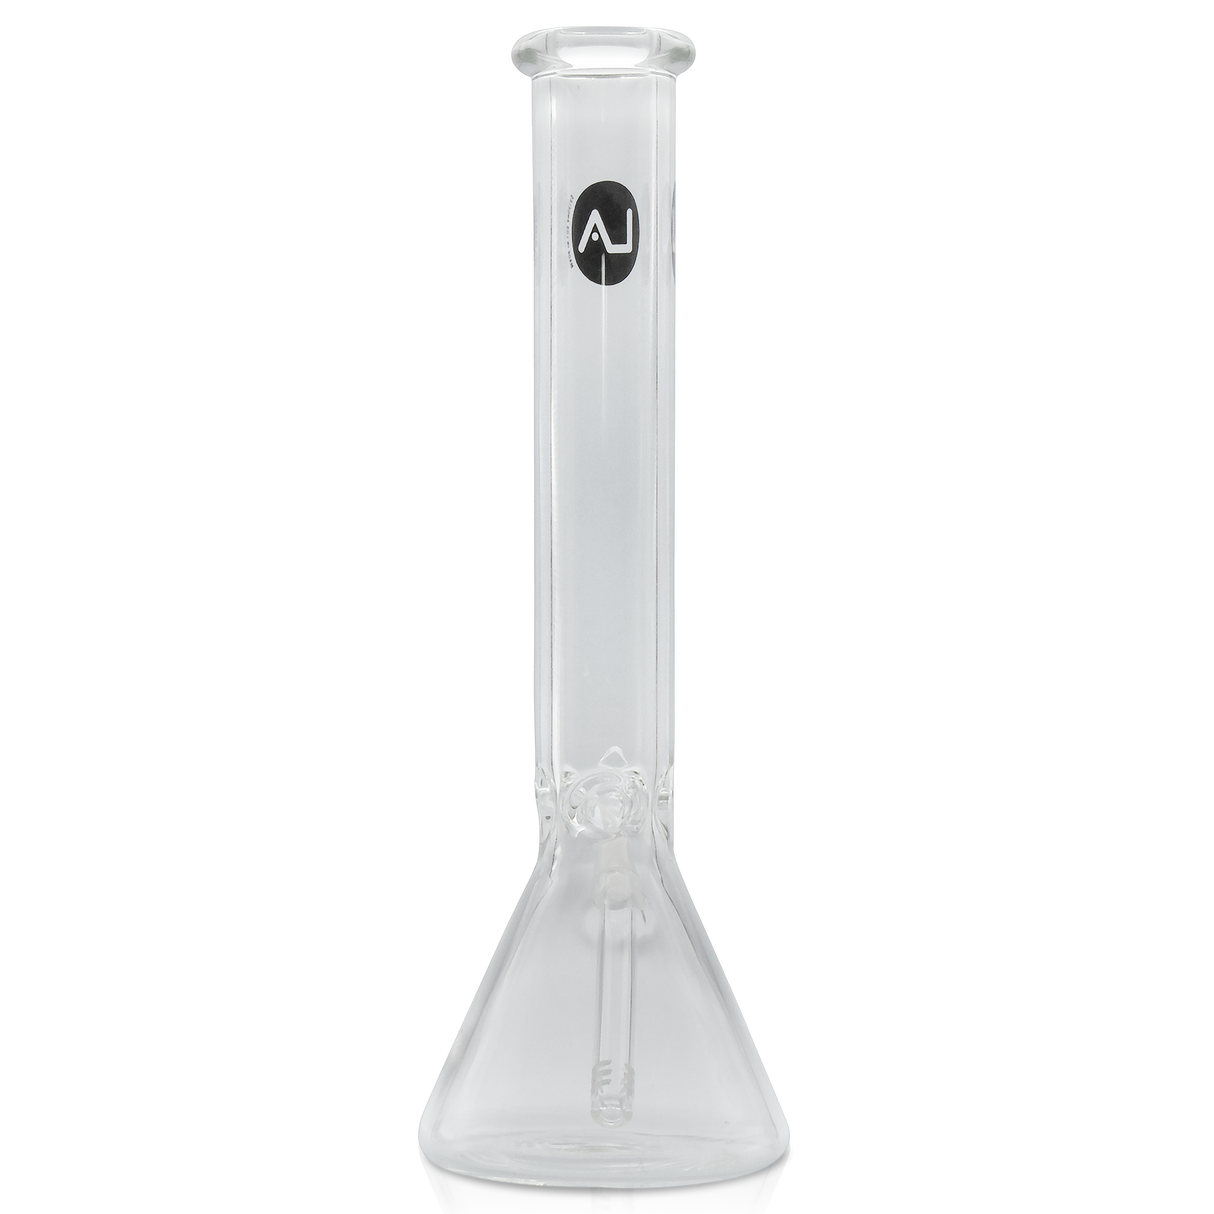 LA Pipes "Thicc Boy" 9mm Thick Beaker Bong, 16" Tall, Heavy Borosilicate Glass - Front View